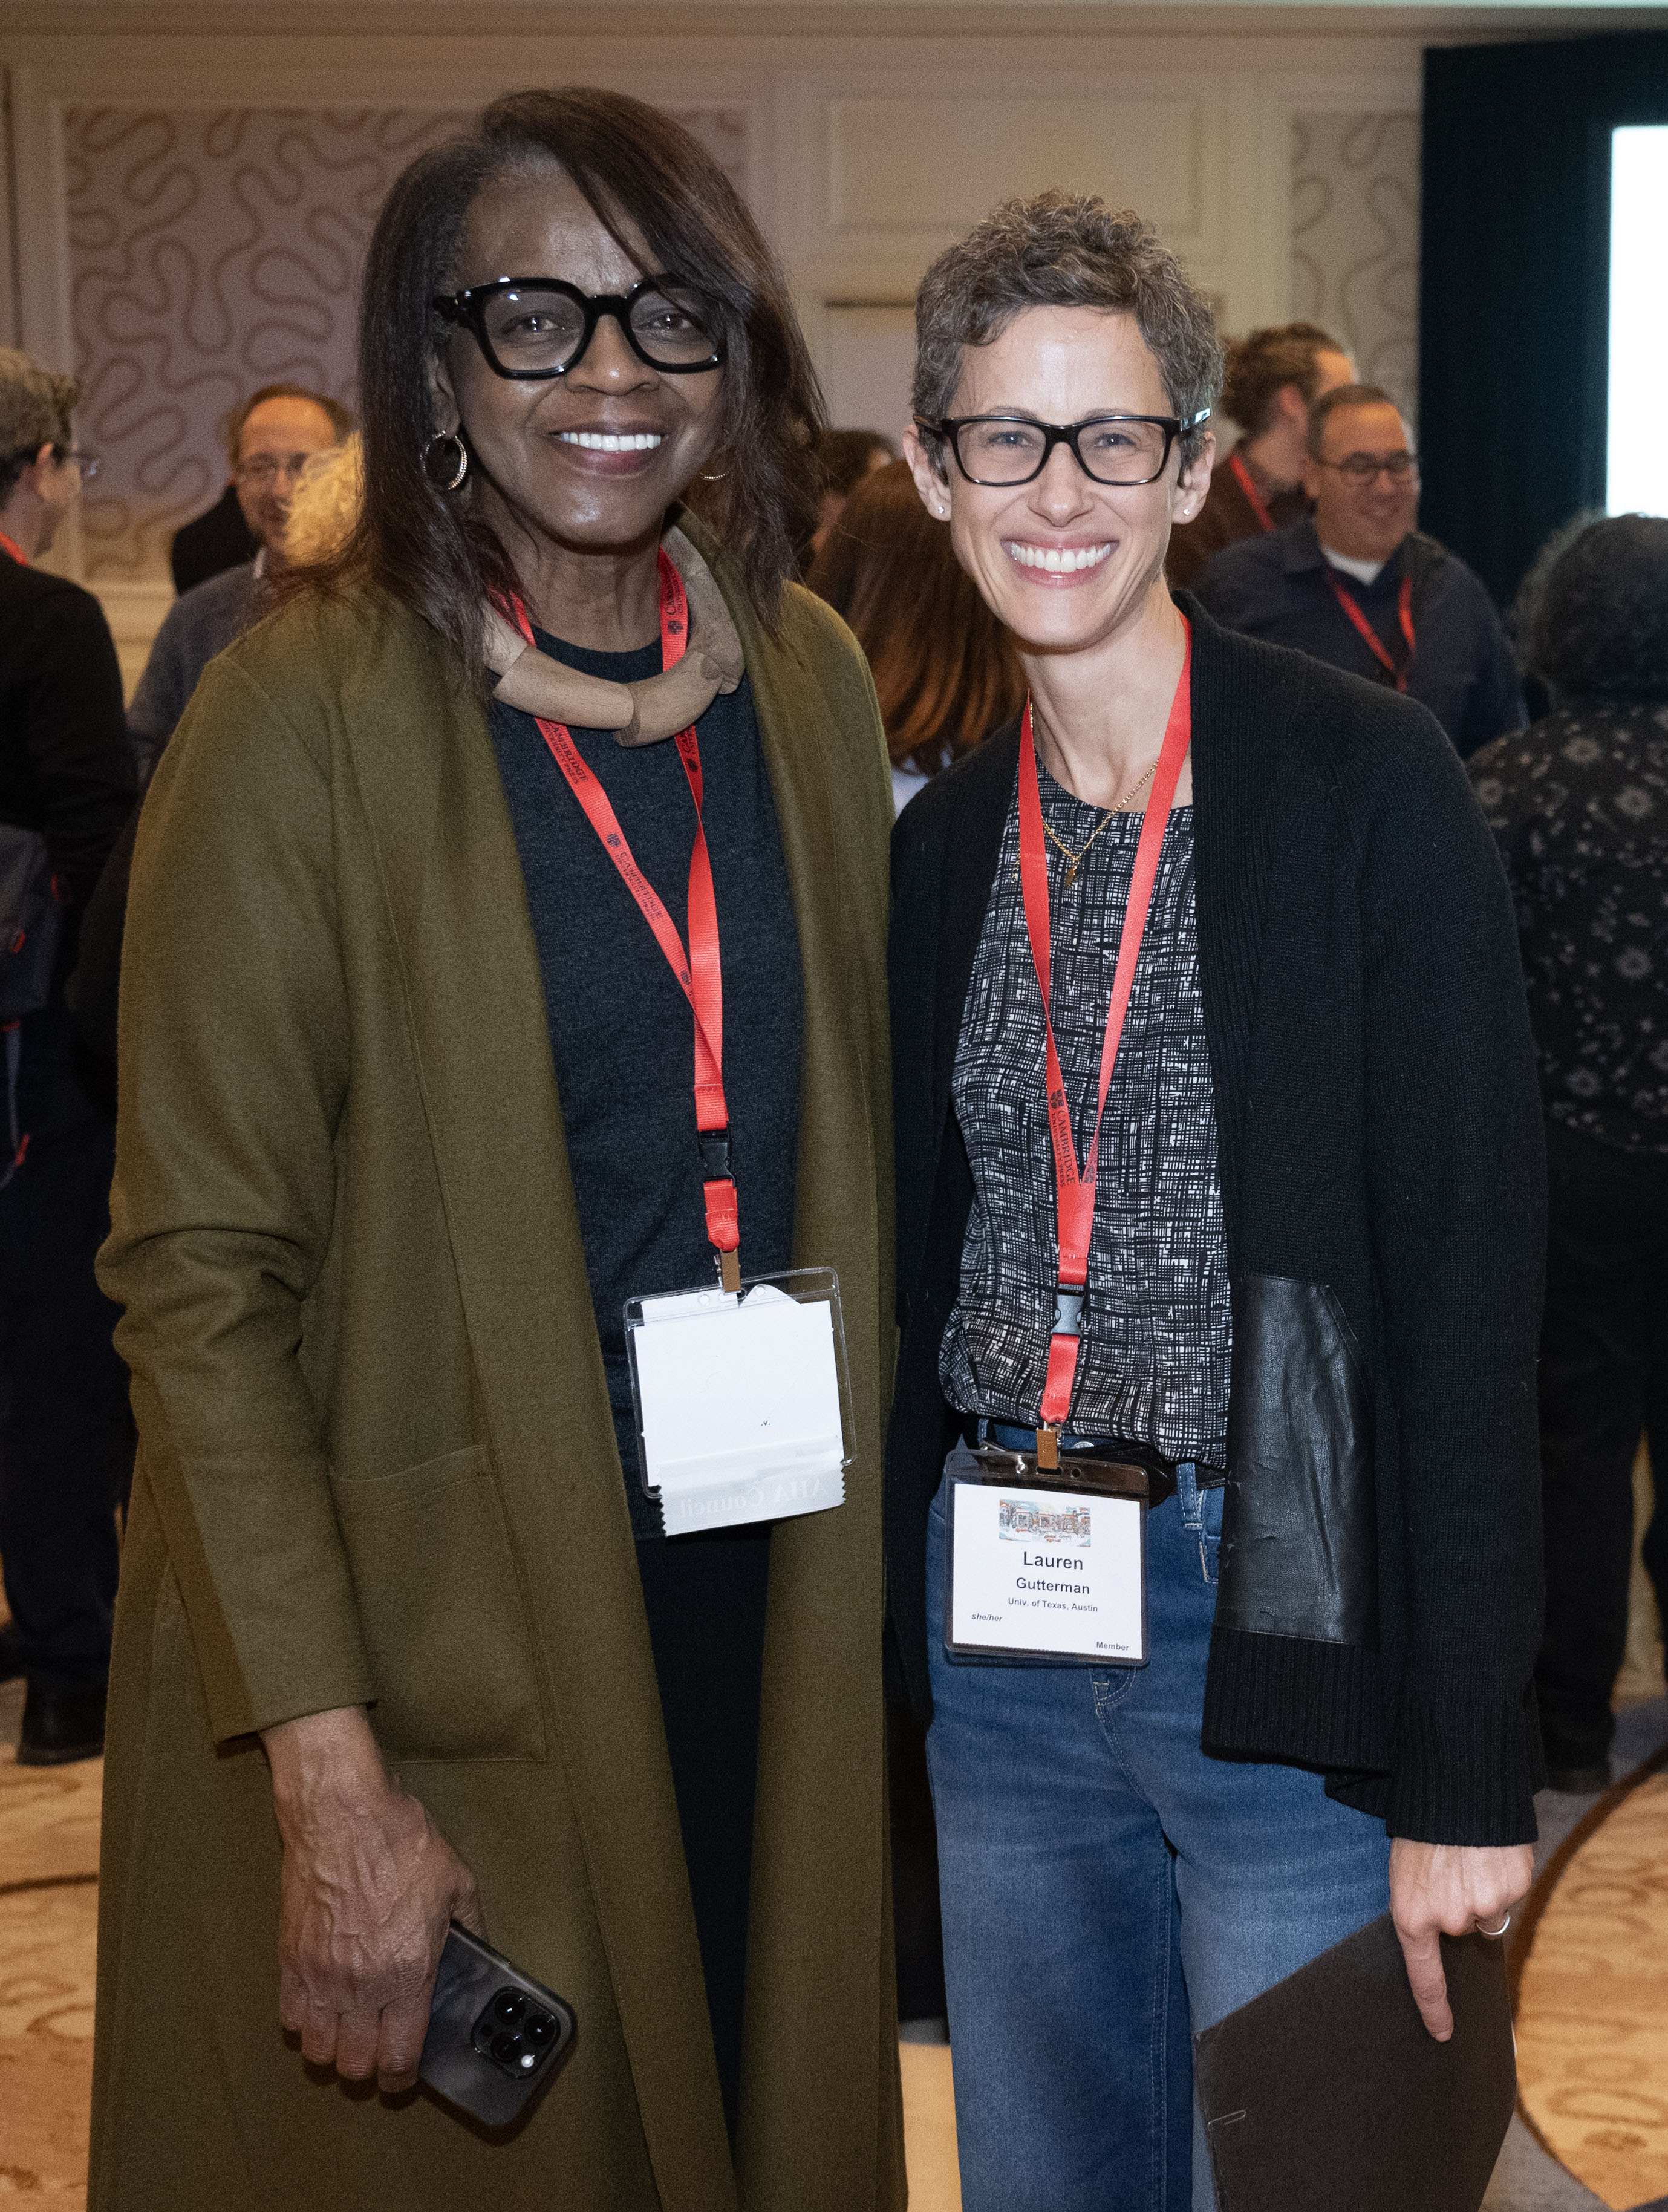  An older Black woman wearing glasses and a green sweater smiling next to a white woman with short gray-brown hair.